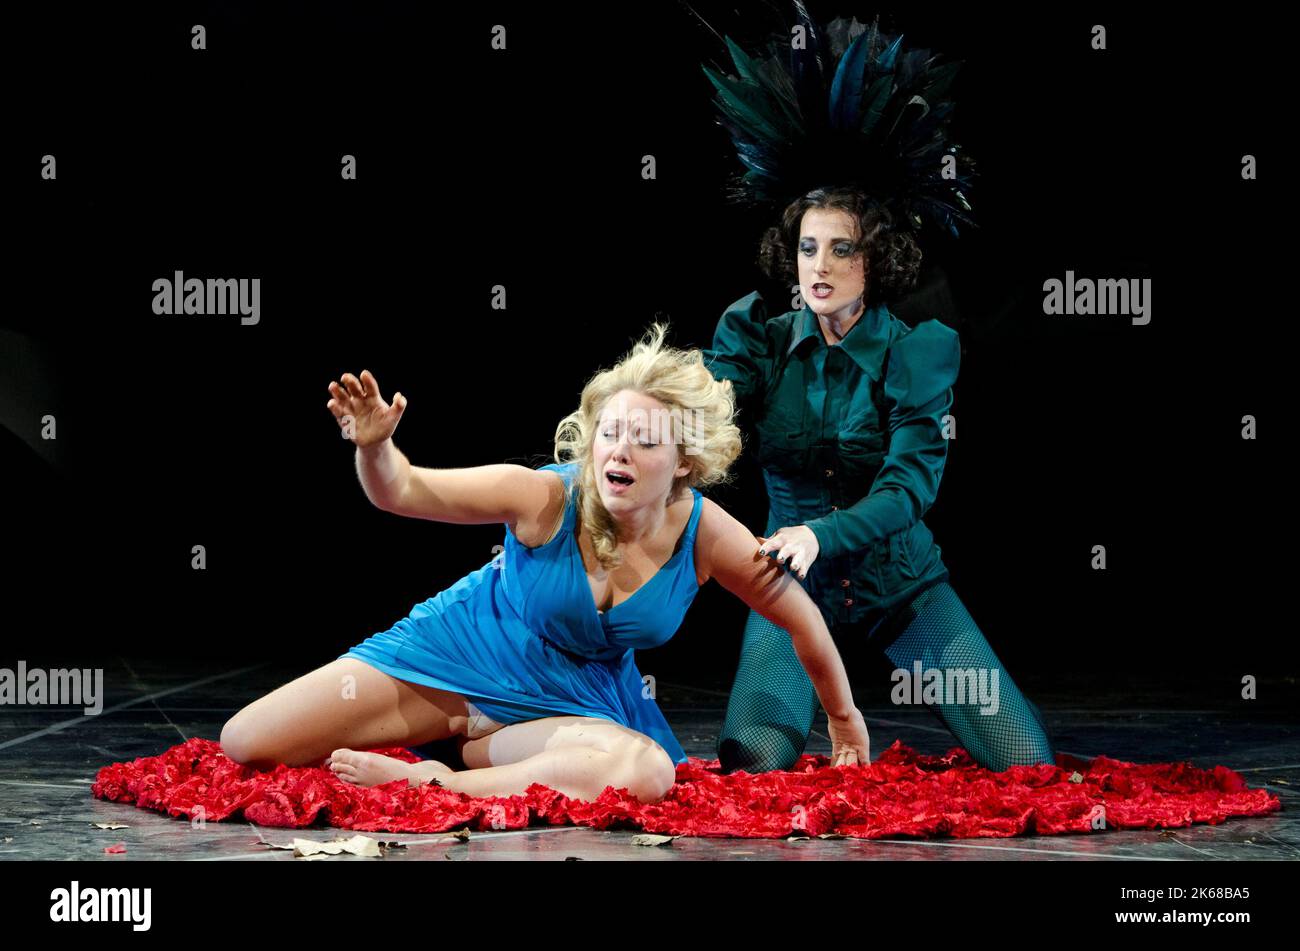 l-r: Sophie Bevan (Pamina), Kim Sheehan (Queen of the Night) in THE MAGIC FLUTE at Garsington Opera at Wormsley, Oxford, England  02/06/2011  music: Mozart  libretto: Emanuel Schikaneder  conductor: Martin Andre  design: Niki Turner  lighting: Bruno Poet   director: Olivia Fuchs Stock Photo